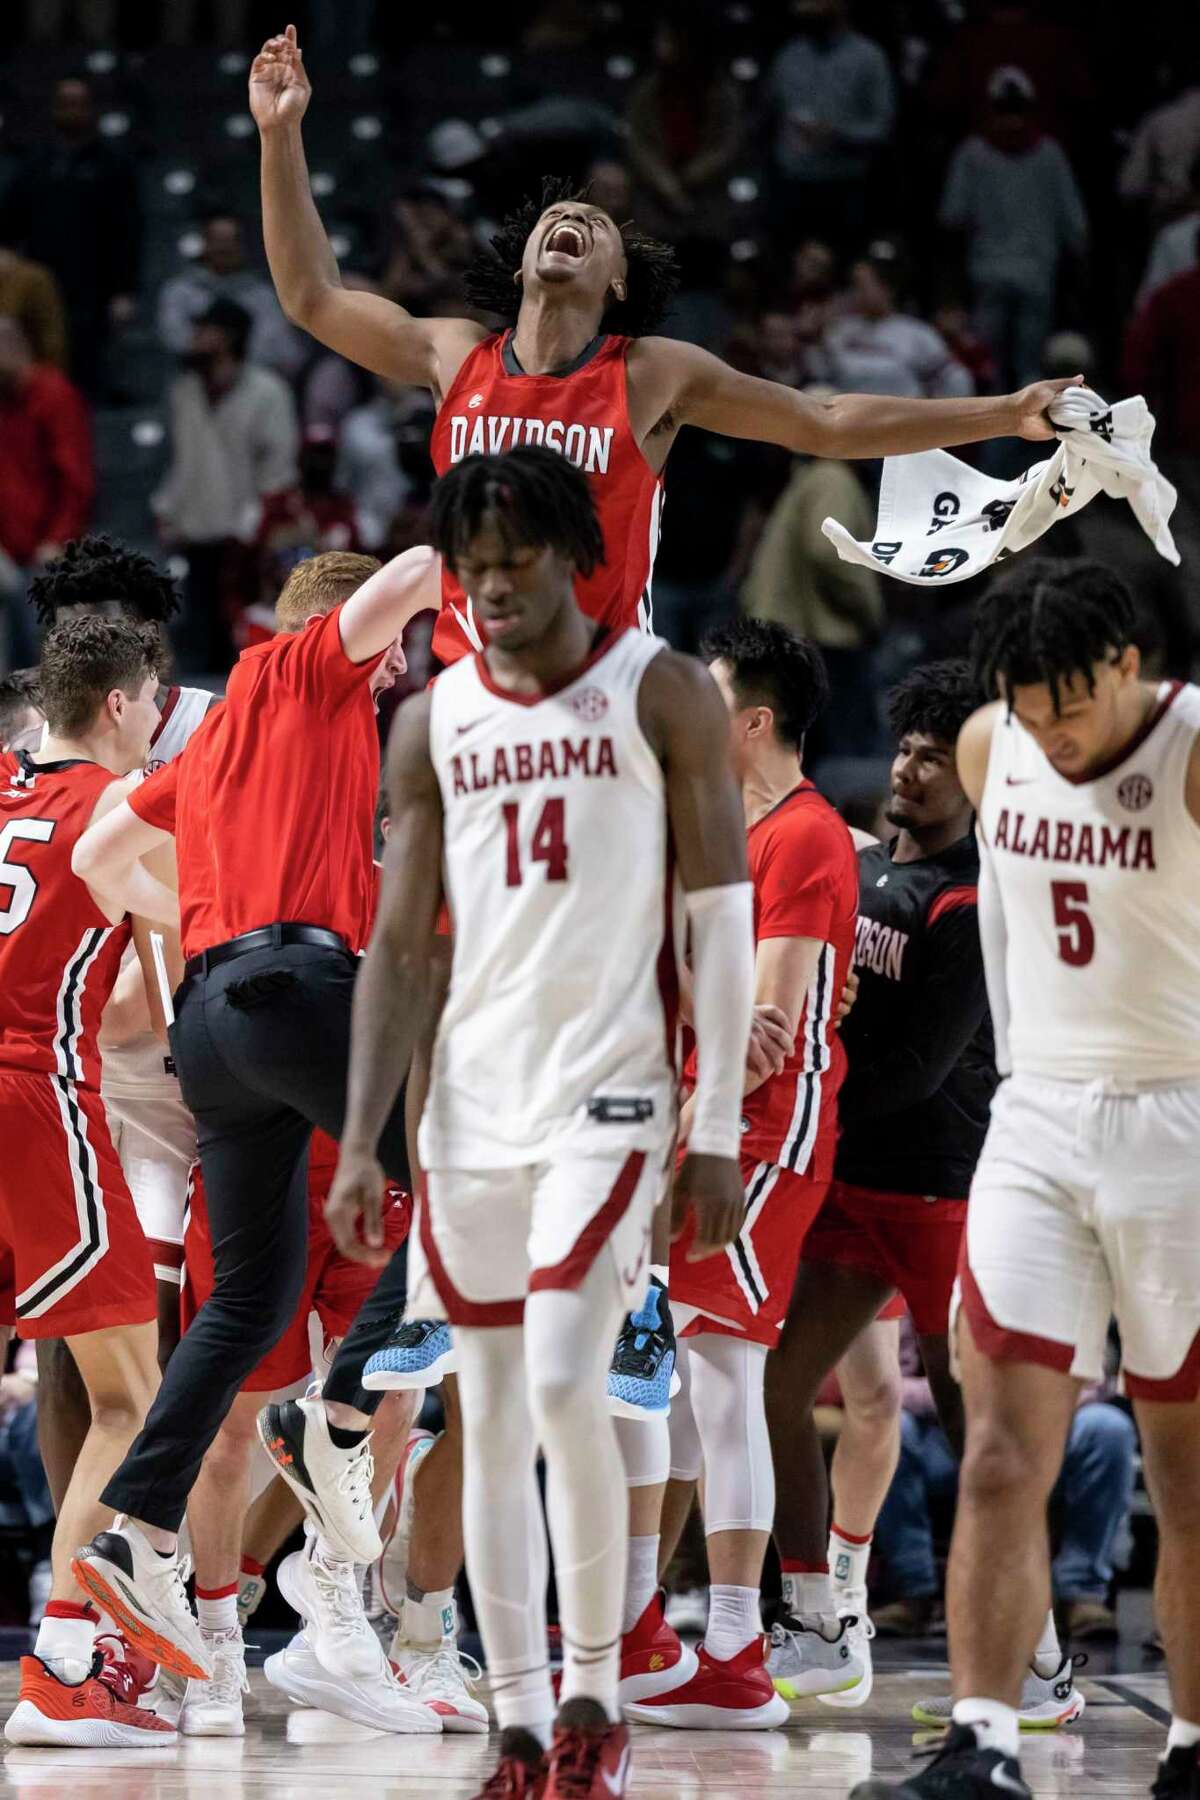 Davidson guard/forward Desmond Watson (4) leaps into the air to celebrate an upset of No. 10 Alabama in Birmingham, Ala. Also pictured walking off are Alabama guards Keon Ellis (14) and Jaden Shackelford (5).